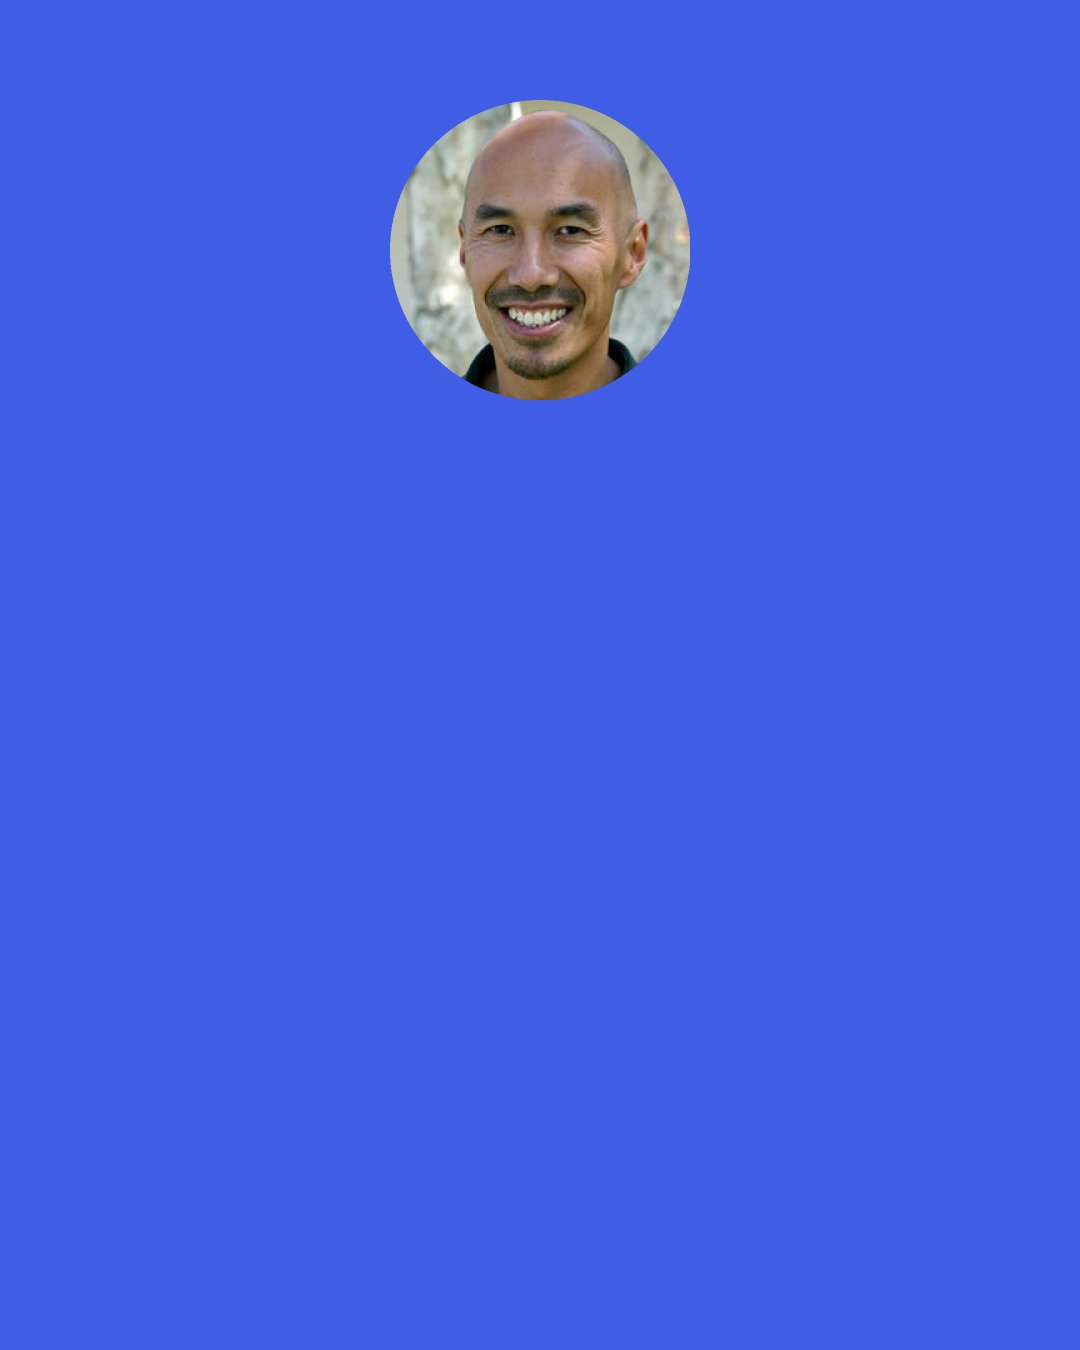 Francis Chan: I’ve got this amazing relationship with God that is better than life, itself, so marvelous, so wonderful that everything else can fall apart and I’m okay.